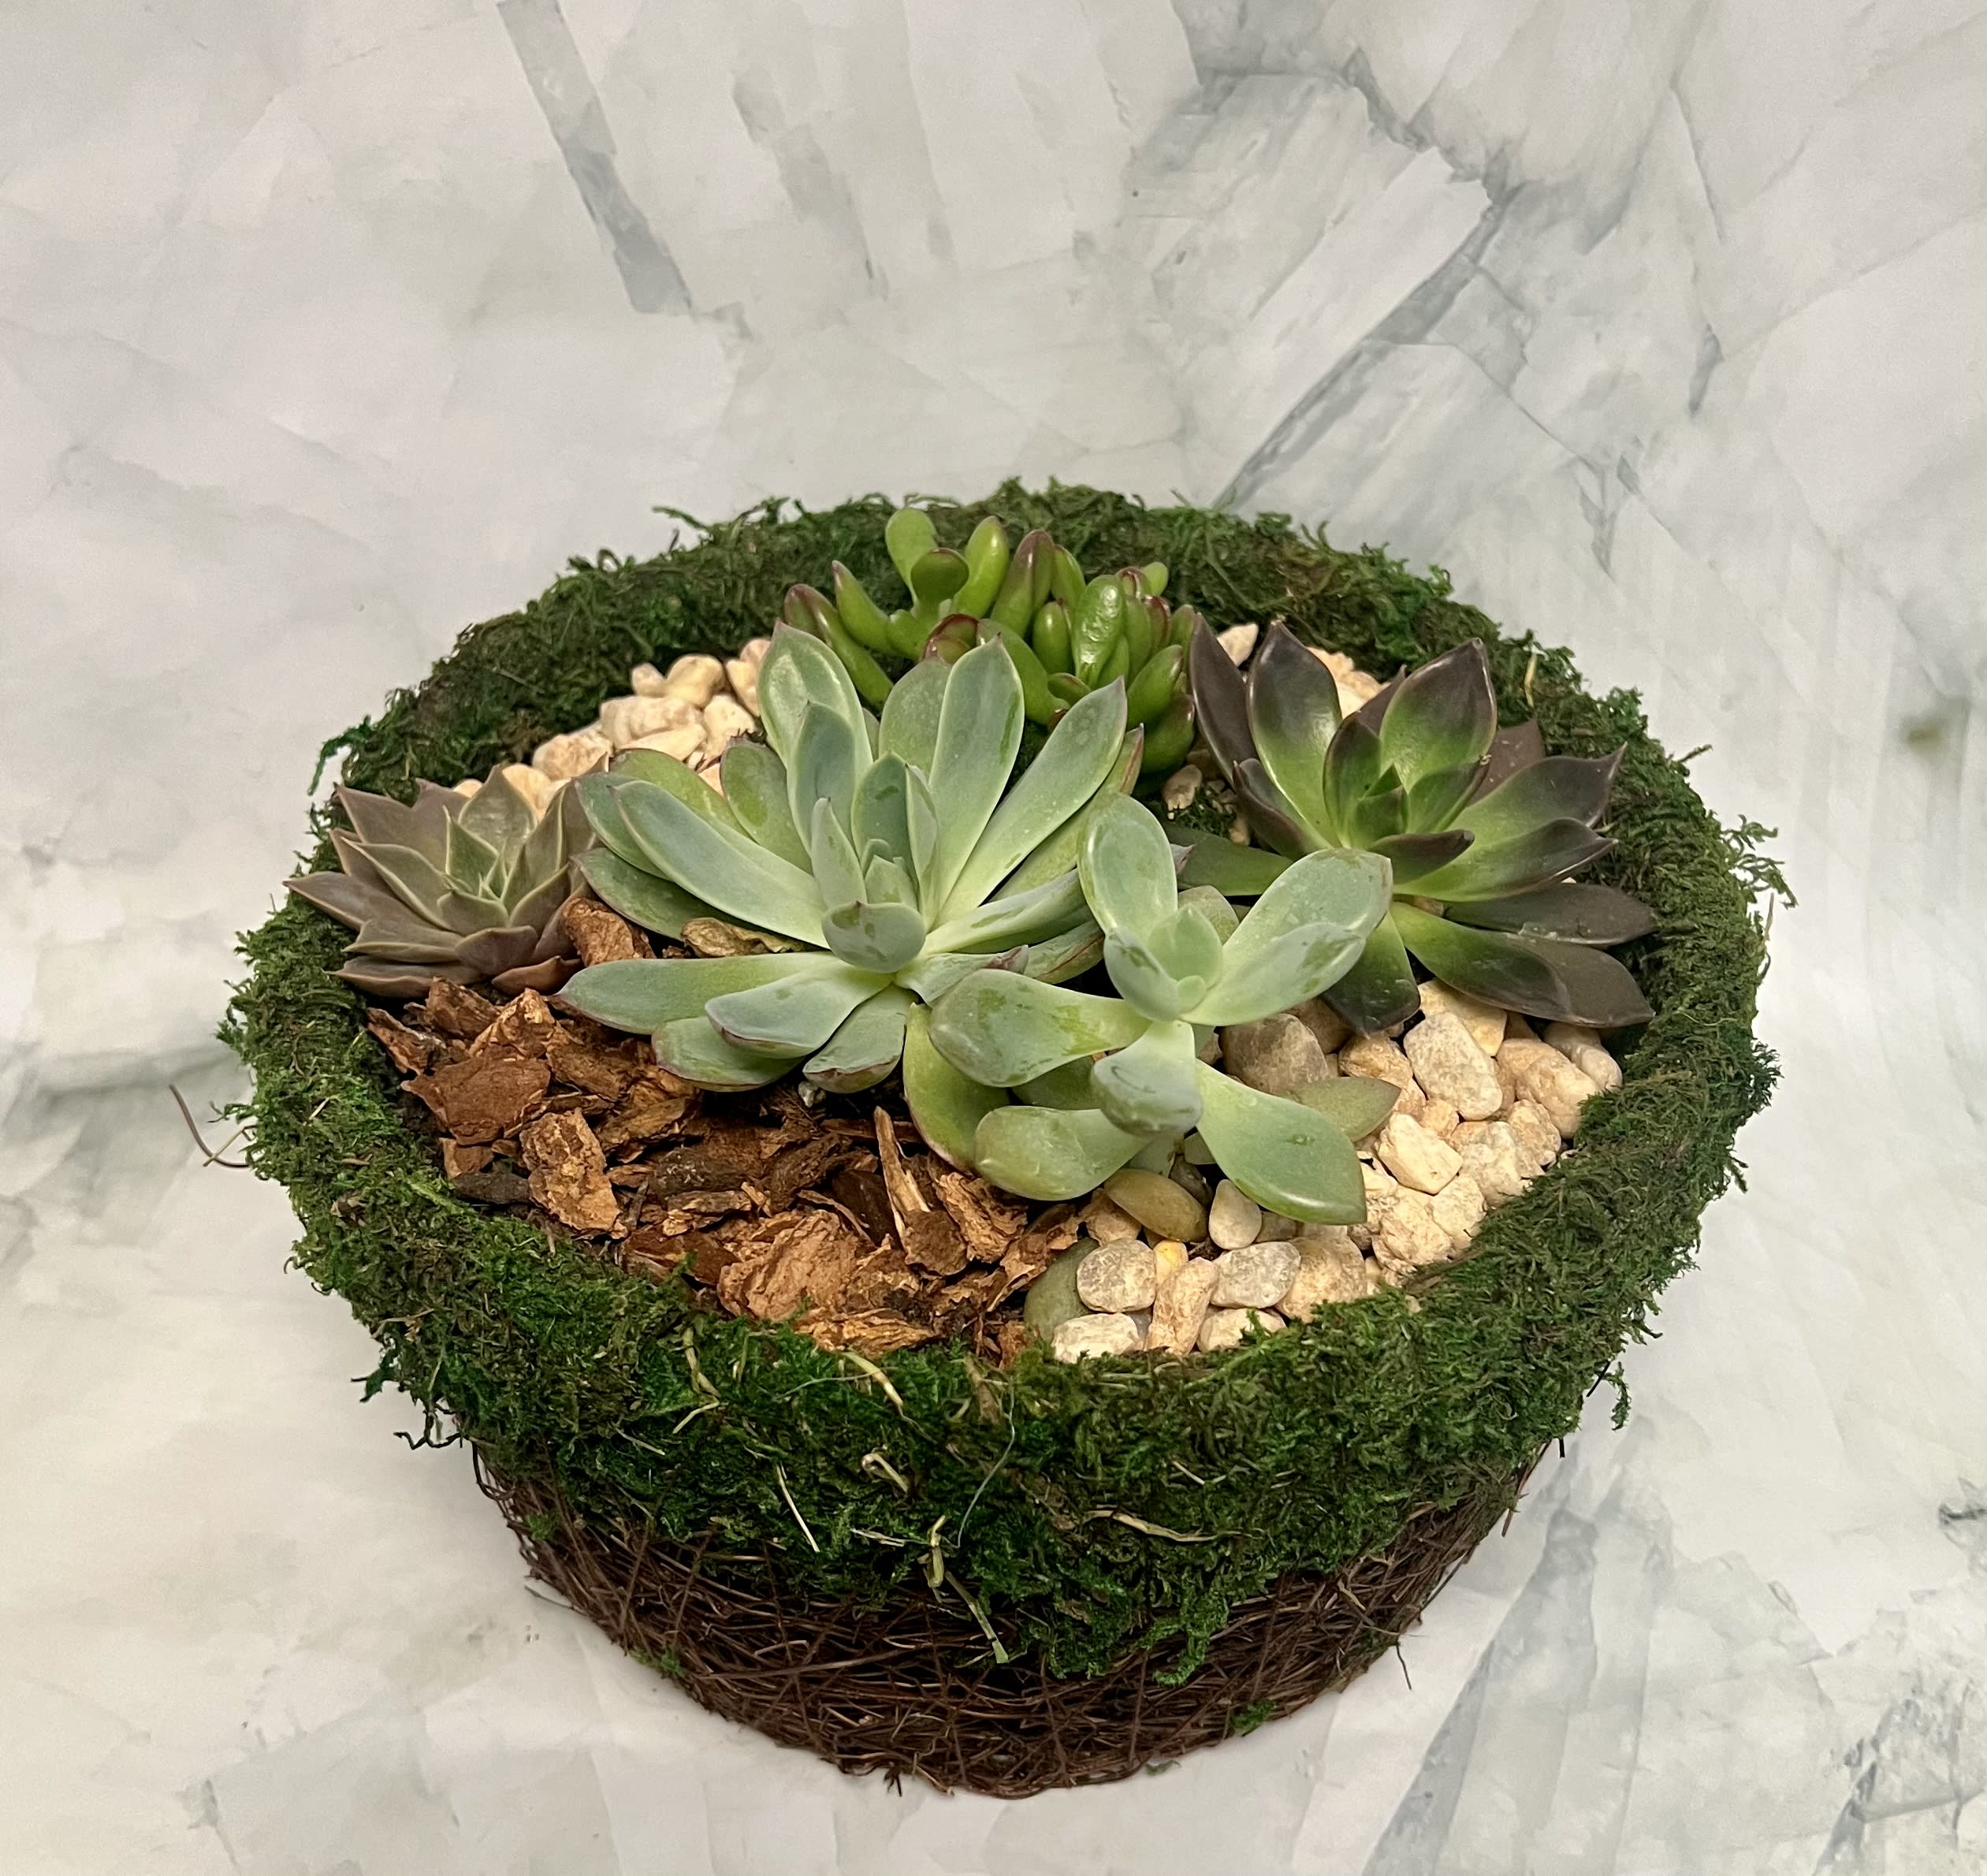 Rainforest Succulent Garden  - This creation will remind you of the rainforest floor. The basket has moss on the rim. Inside are about 5 beautiful handpicked succulents that are selected by our local greenhouse. No garden is the same. We choose a wide variety of plants and decorations. 